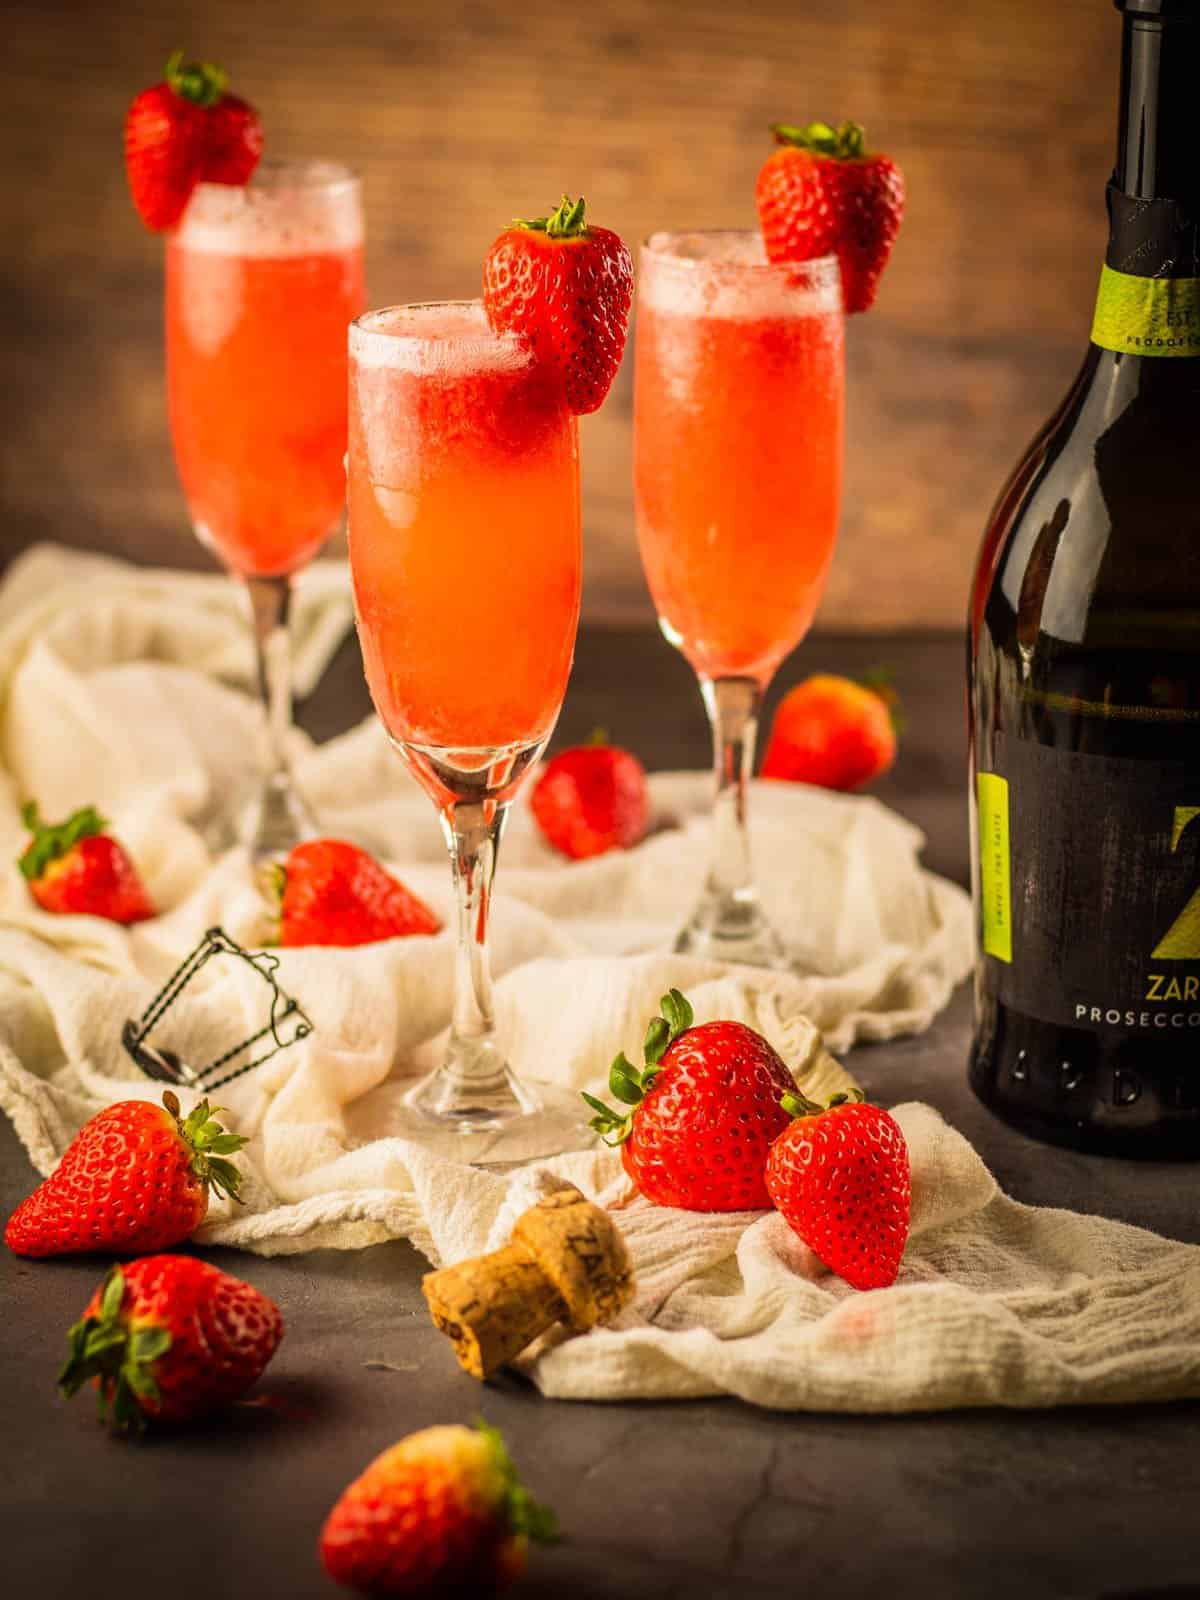 three champagne flutes with prosecco and strawberry puree garnished with a fresh strawberry